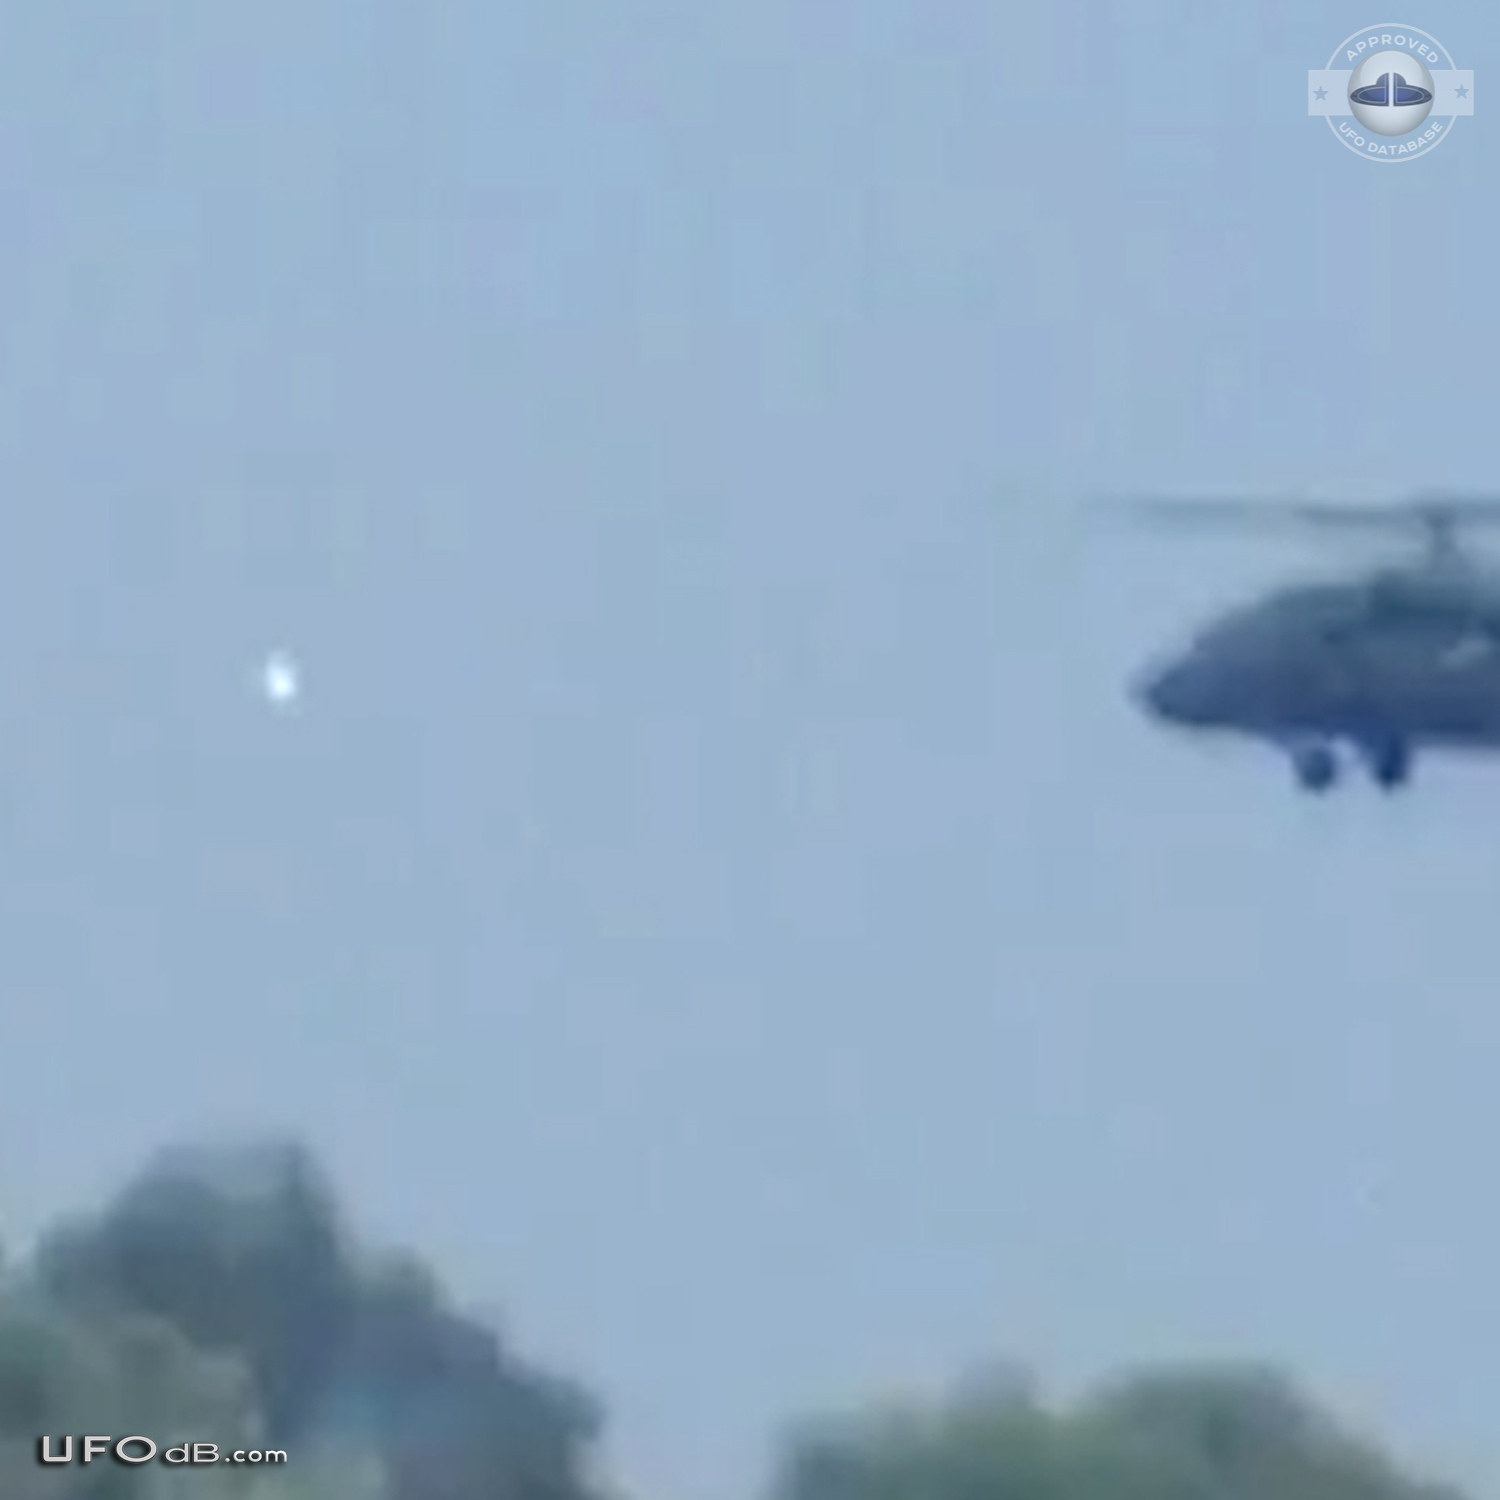 UFO seen near Military Helicopter in Tulancingo, Hidalgo Mexico 2014 UFO Picture #605-3